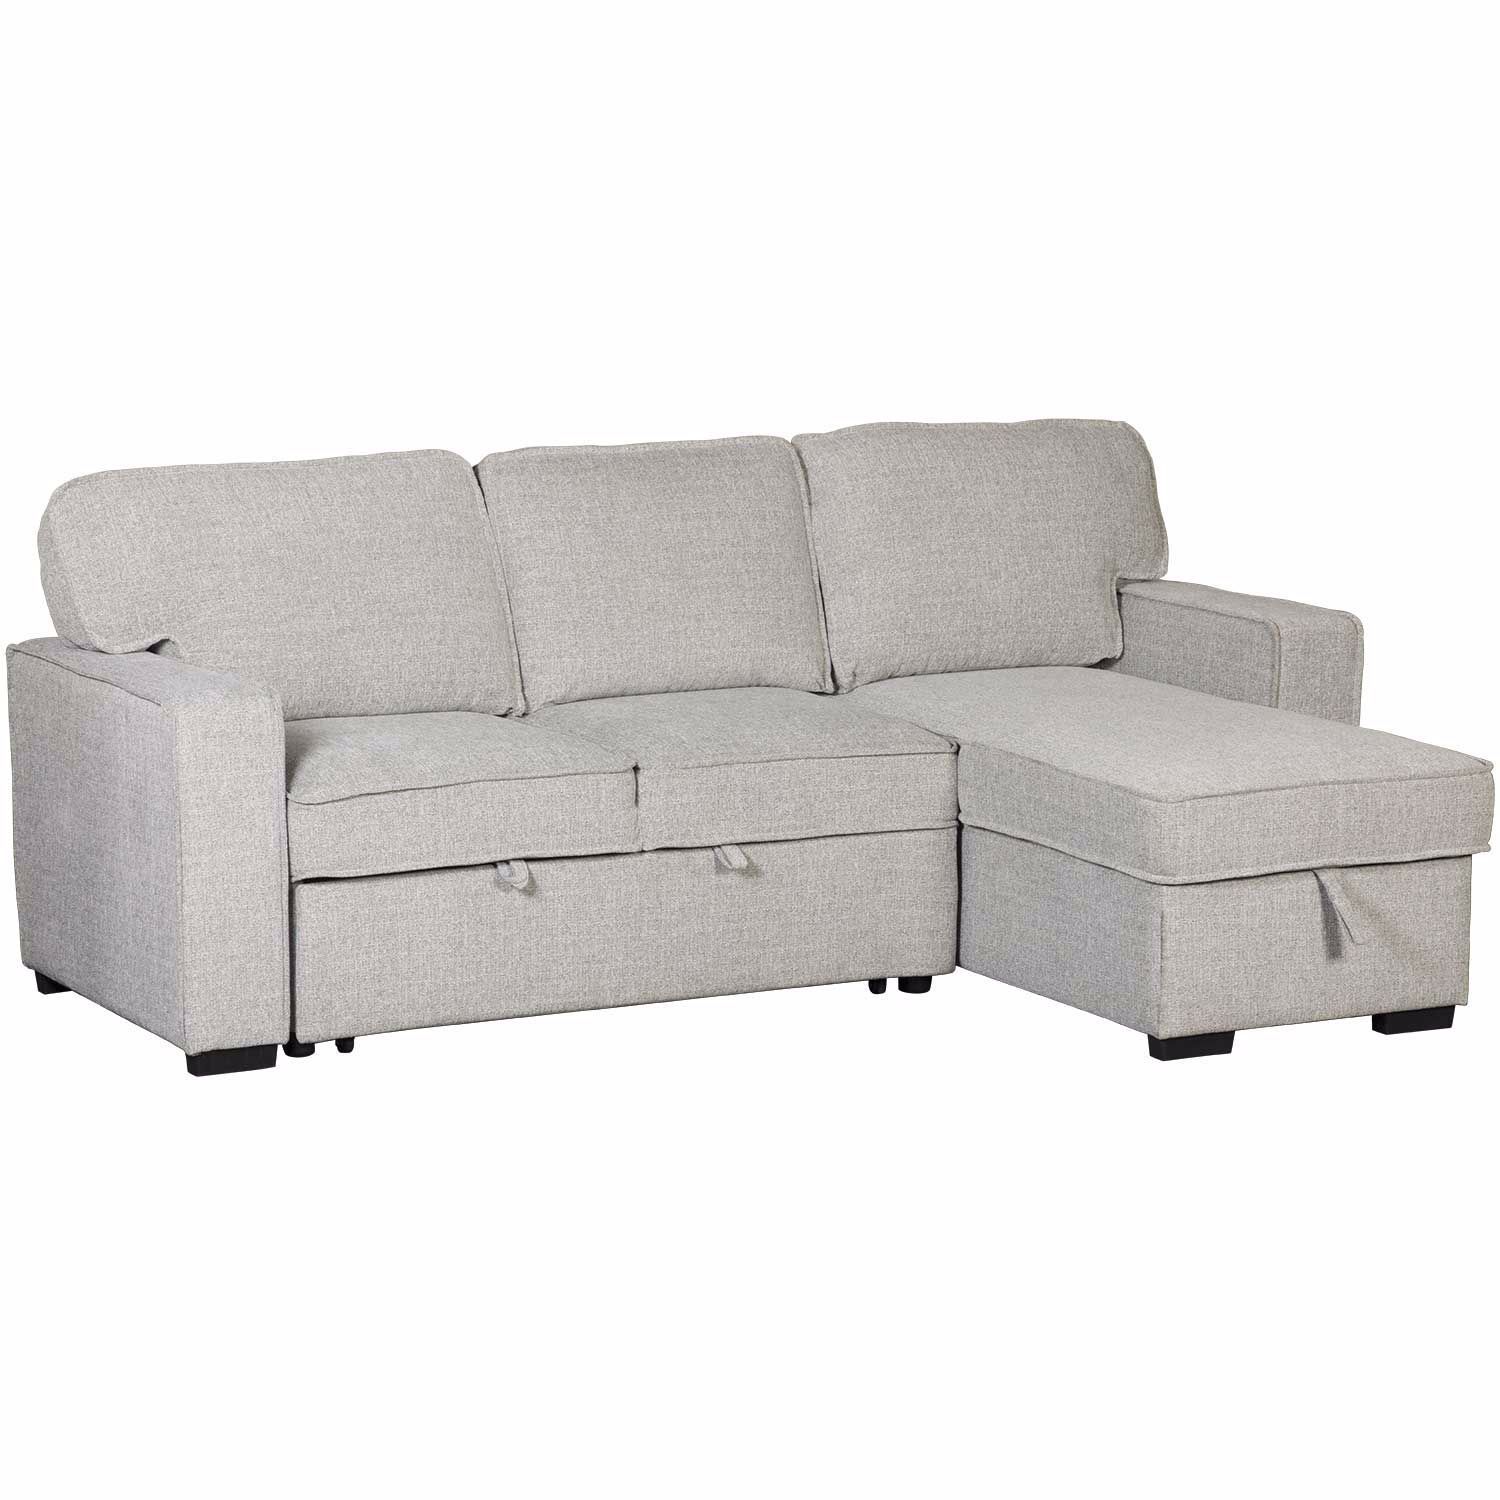 Kent Reversbile Sofa Chaise With Storage | 1d 684 Sc | Afw Within Reversible Pull Out Sofa Couches (View 15 of 20)